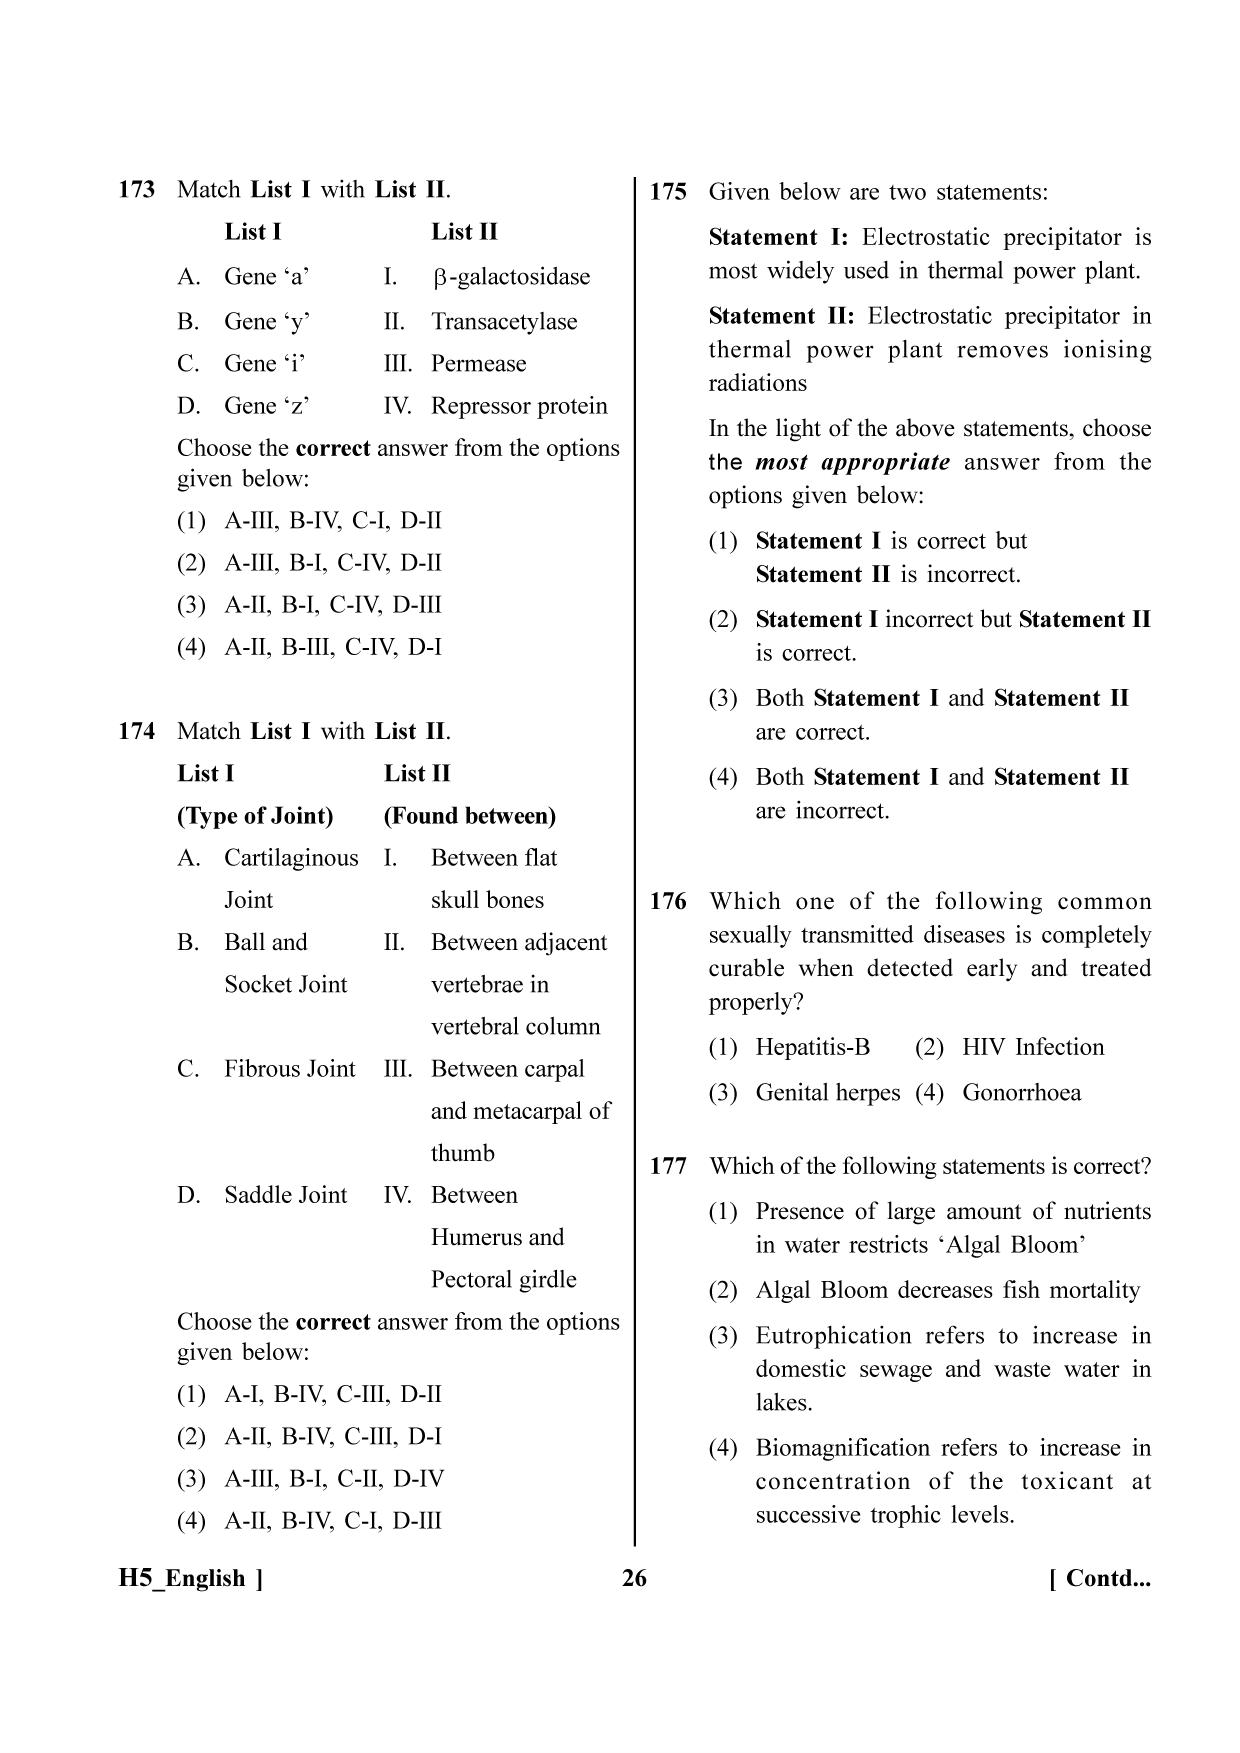 NEET 2023 H5 Question Paper - Page 26